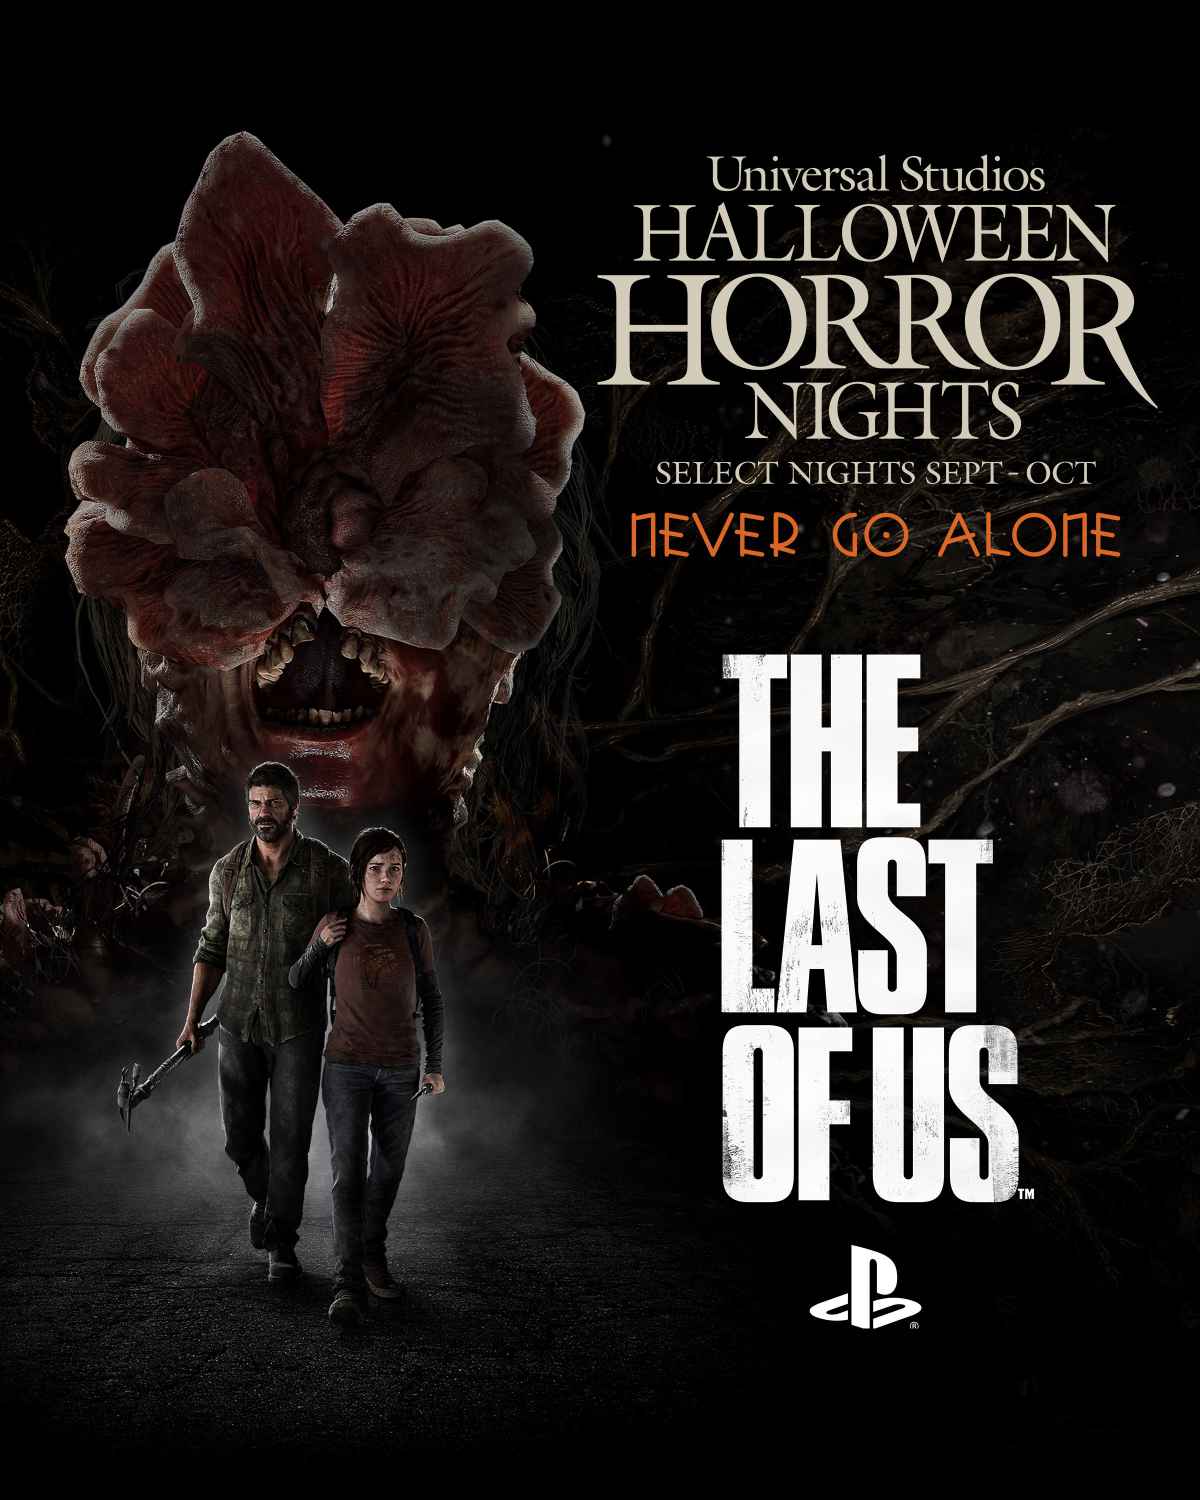 The Last of Us Haunted House